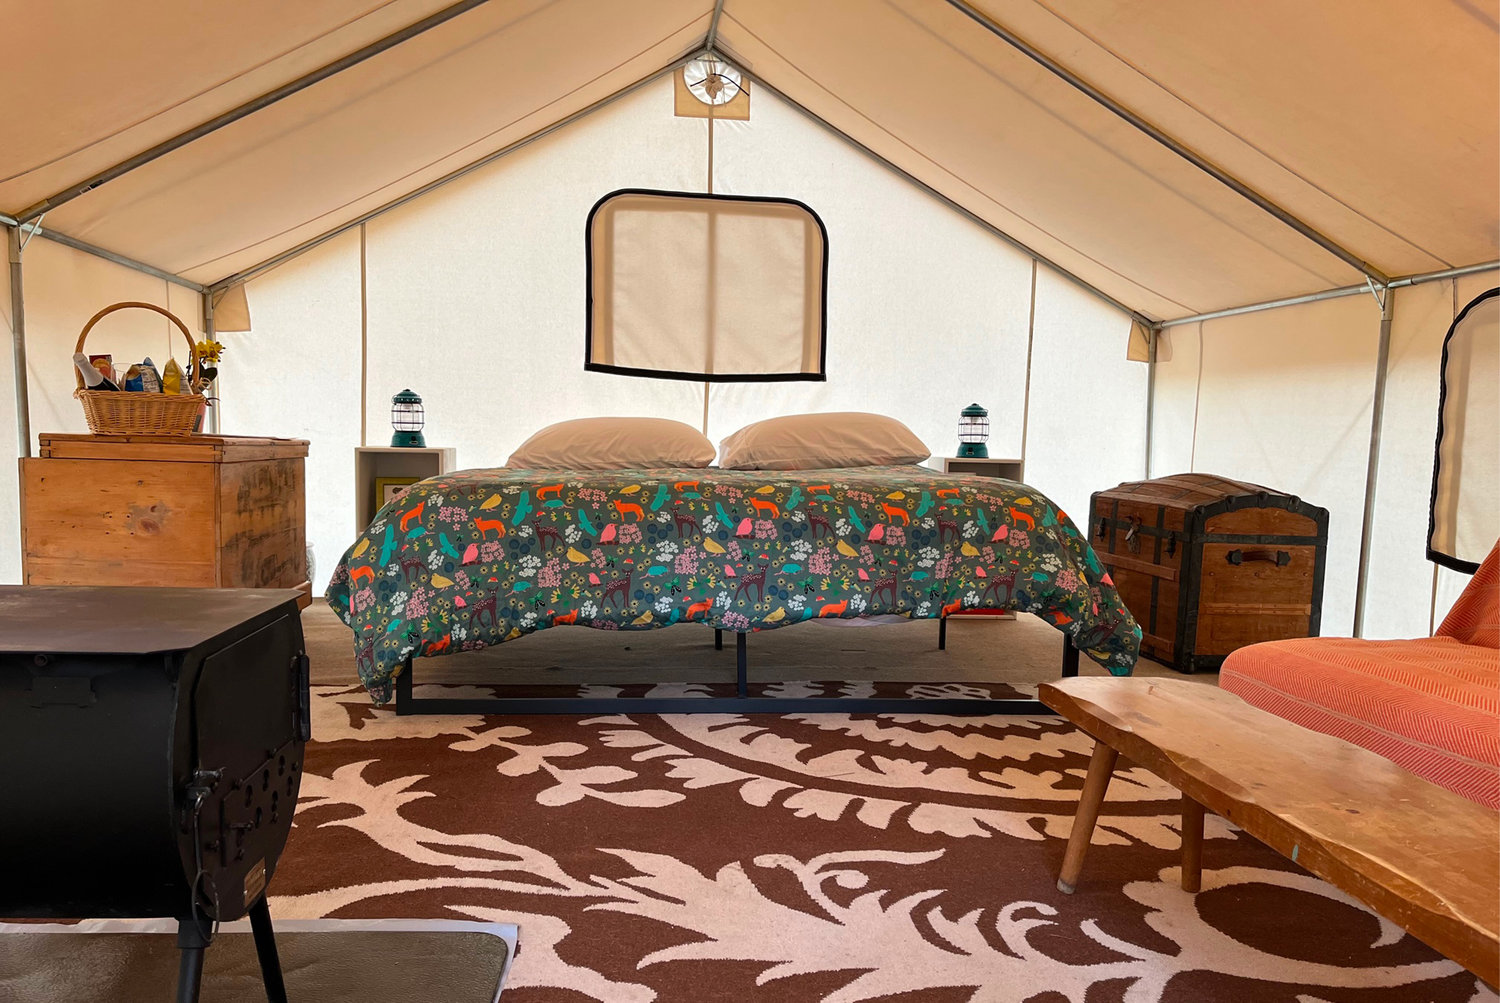 Leave the sleeping bags rolled up at home – each tent has a bed complete with bedding. Other amenities include cooking pans, outdoor seating, and use of a canoe.